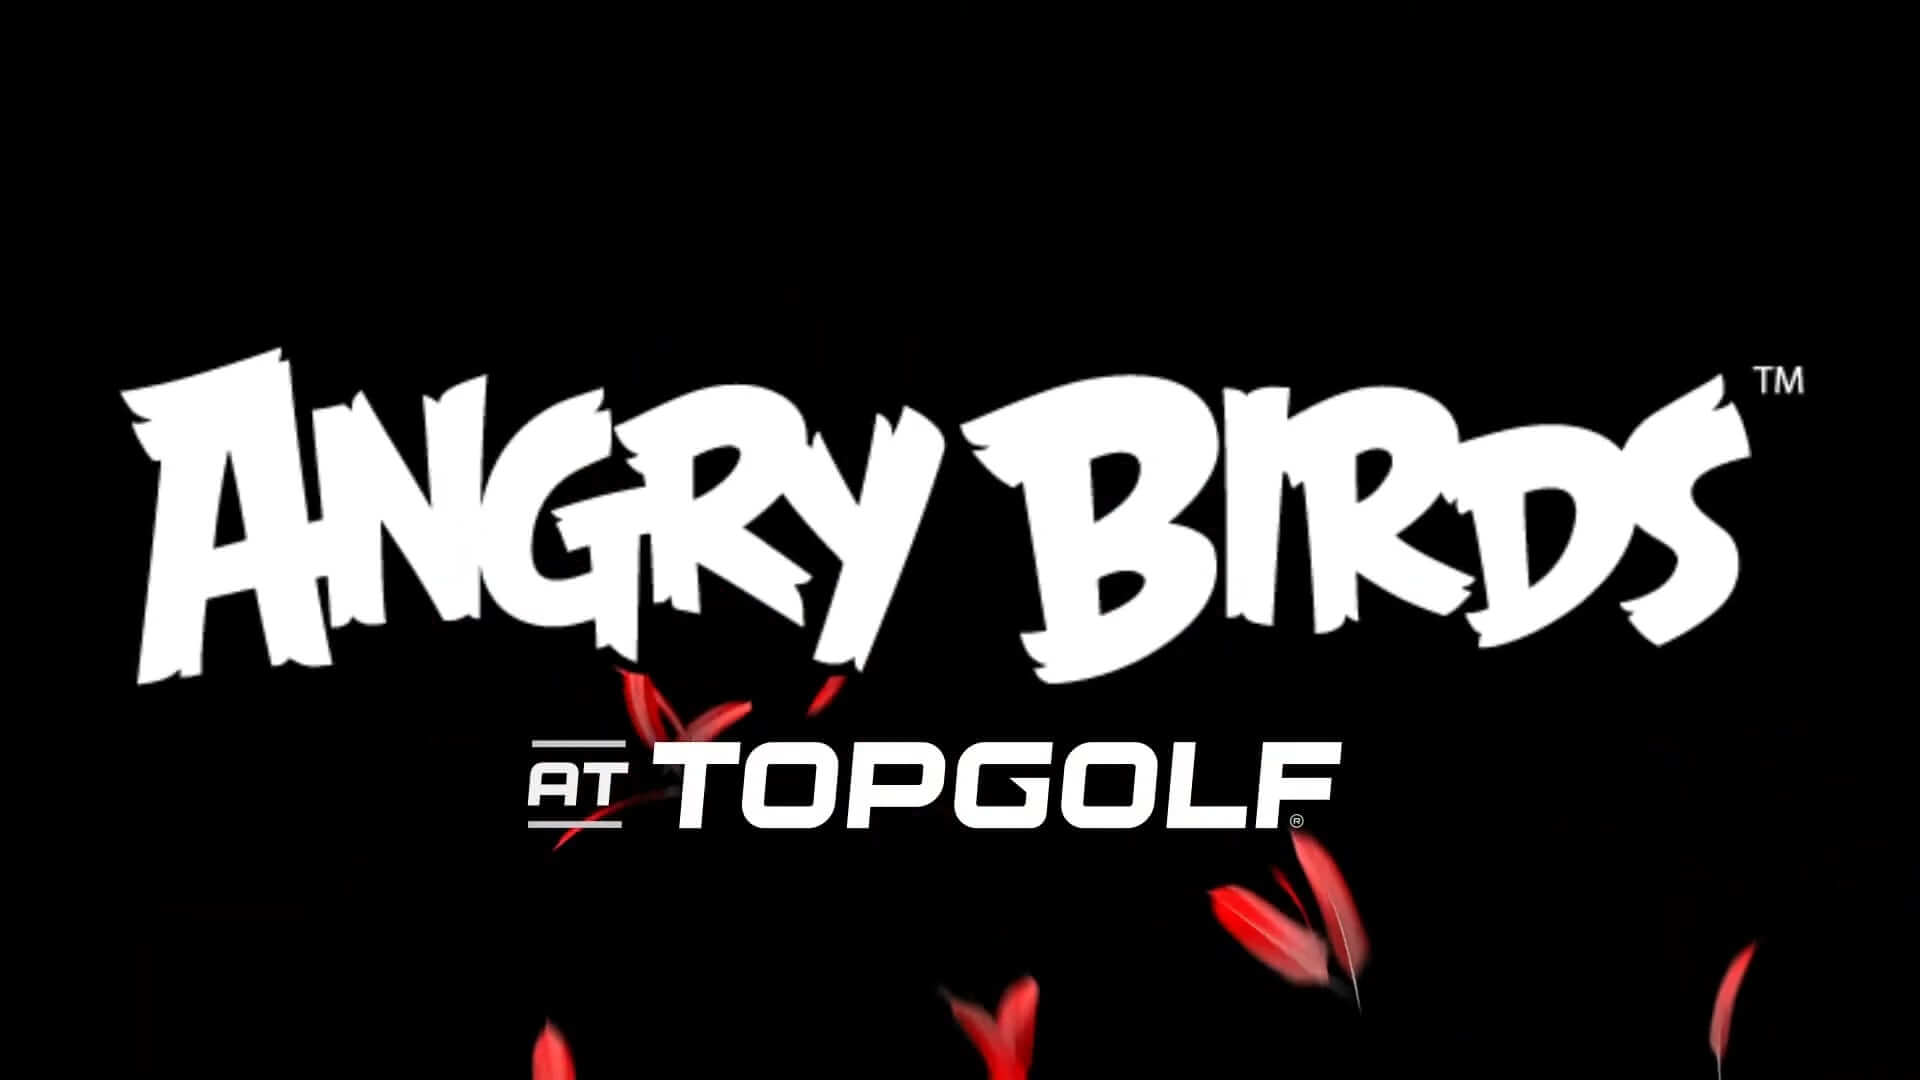 Angry Birds at Topgolf